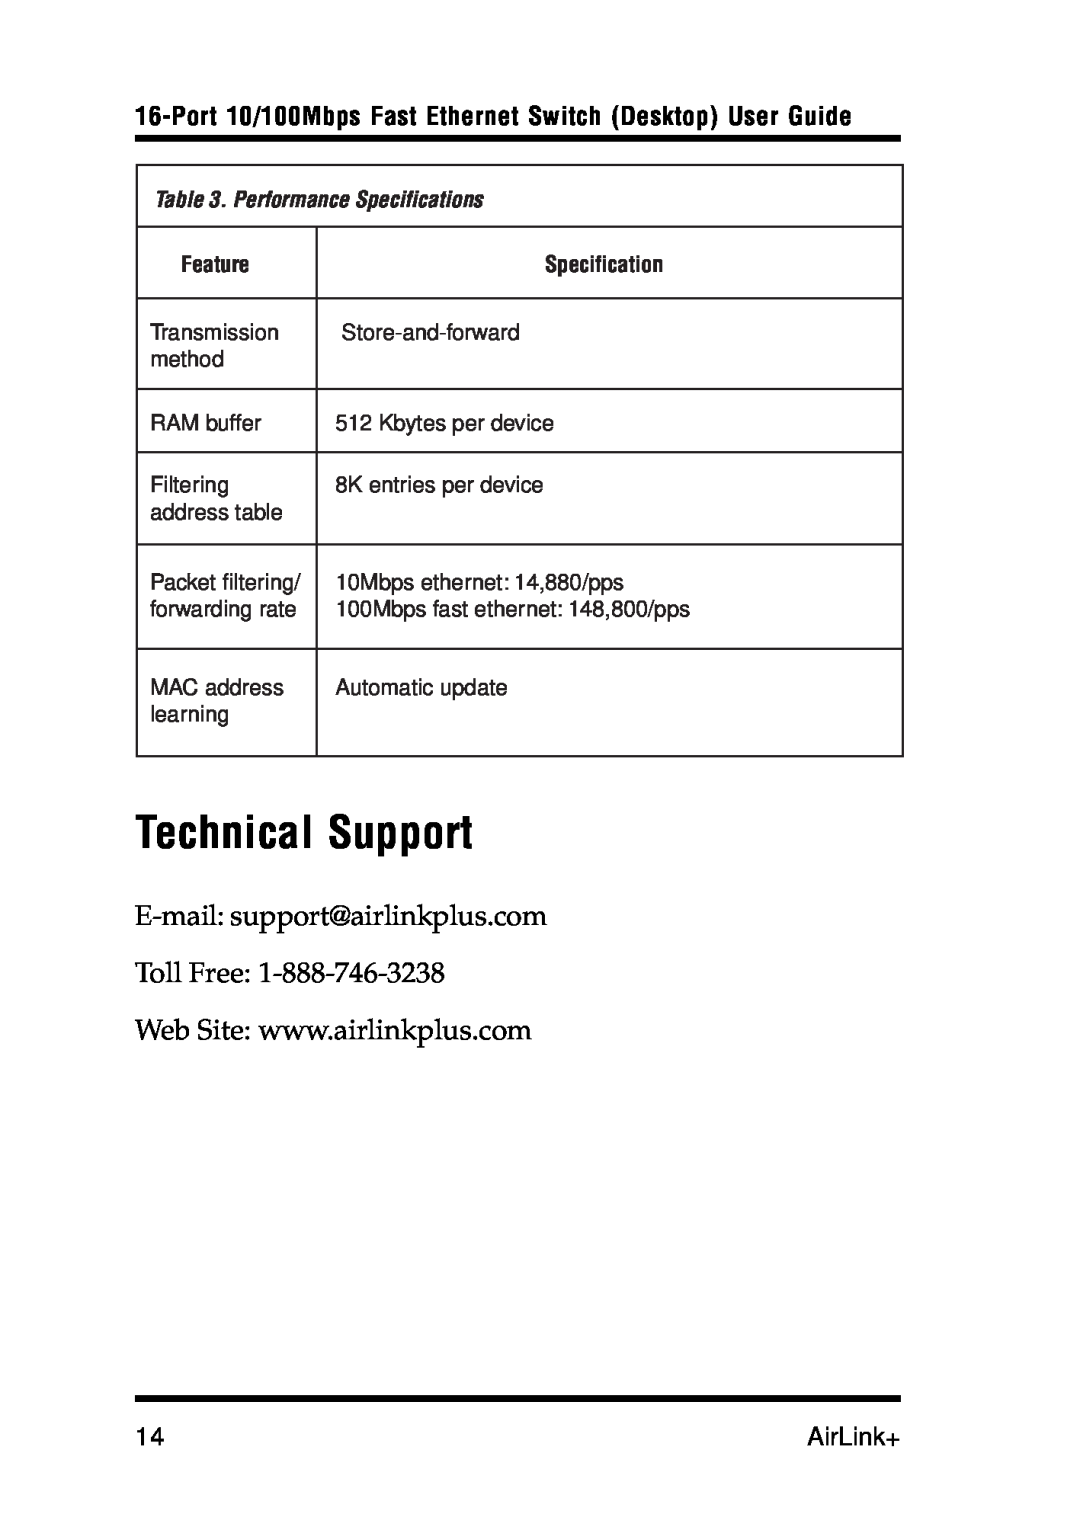 Airlink UG-ASW116-1103 manual Technical Support, Port 10/100Mbps Fast Ethernet Switch Desktop User Guide, AirLink+, Feature 